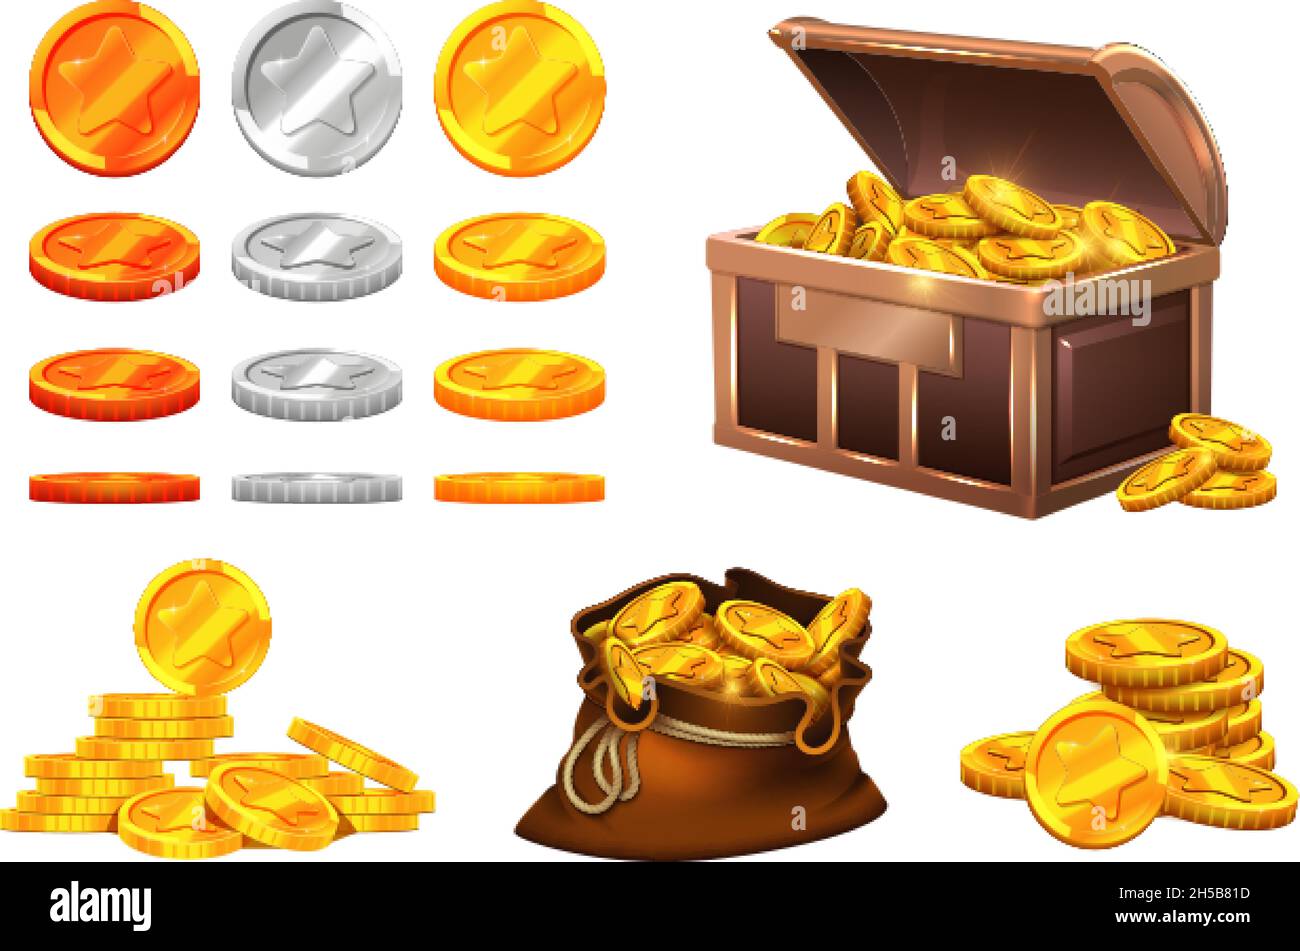 Golden silver coins. Wooden chest coin treasures, bronze gold medals with stars. Isolated bag with money, cartoon game vector elements Stock Vector